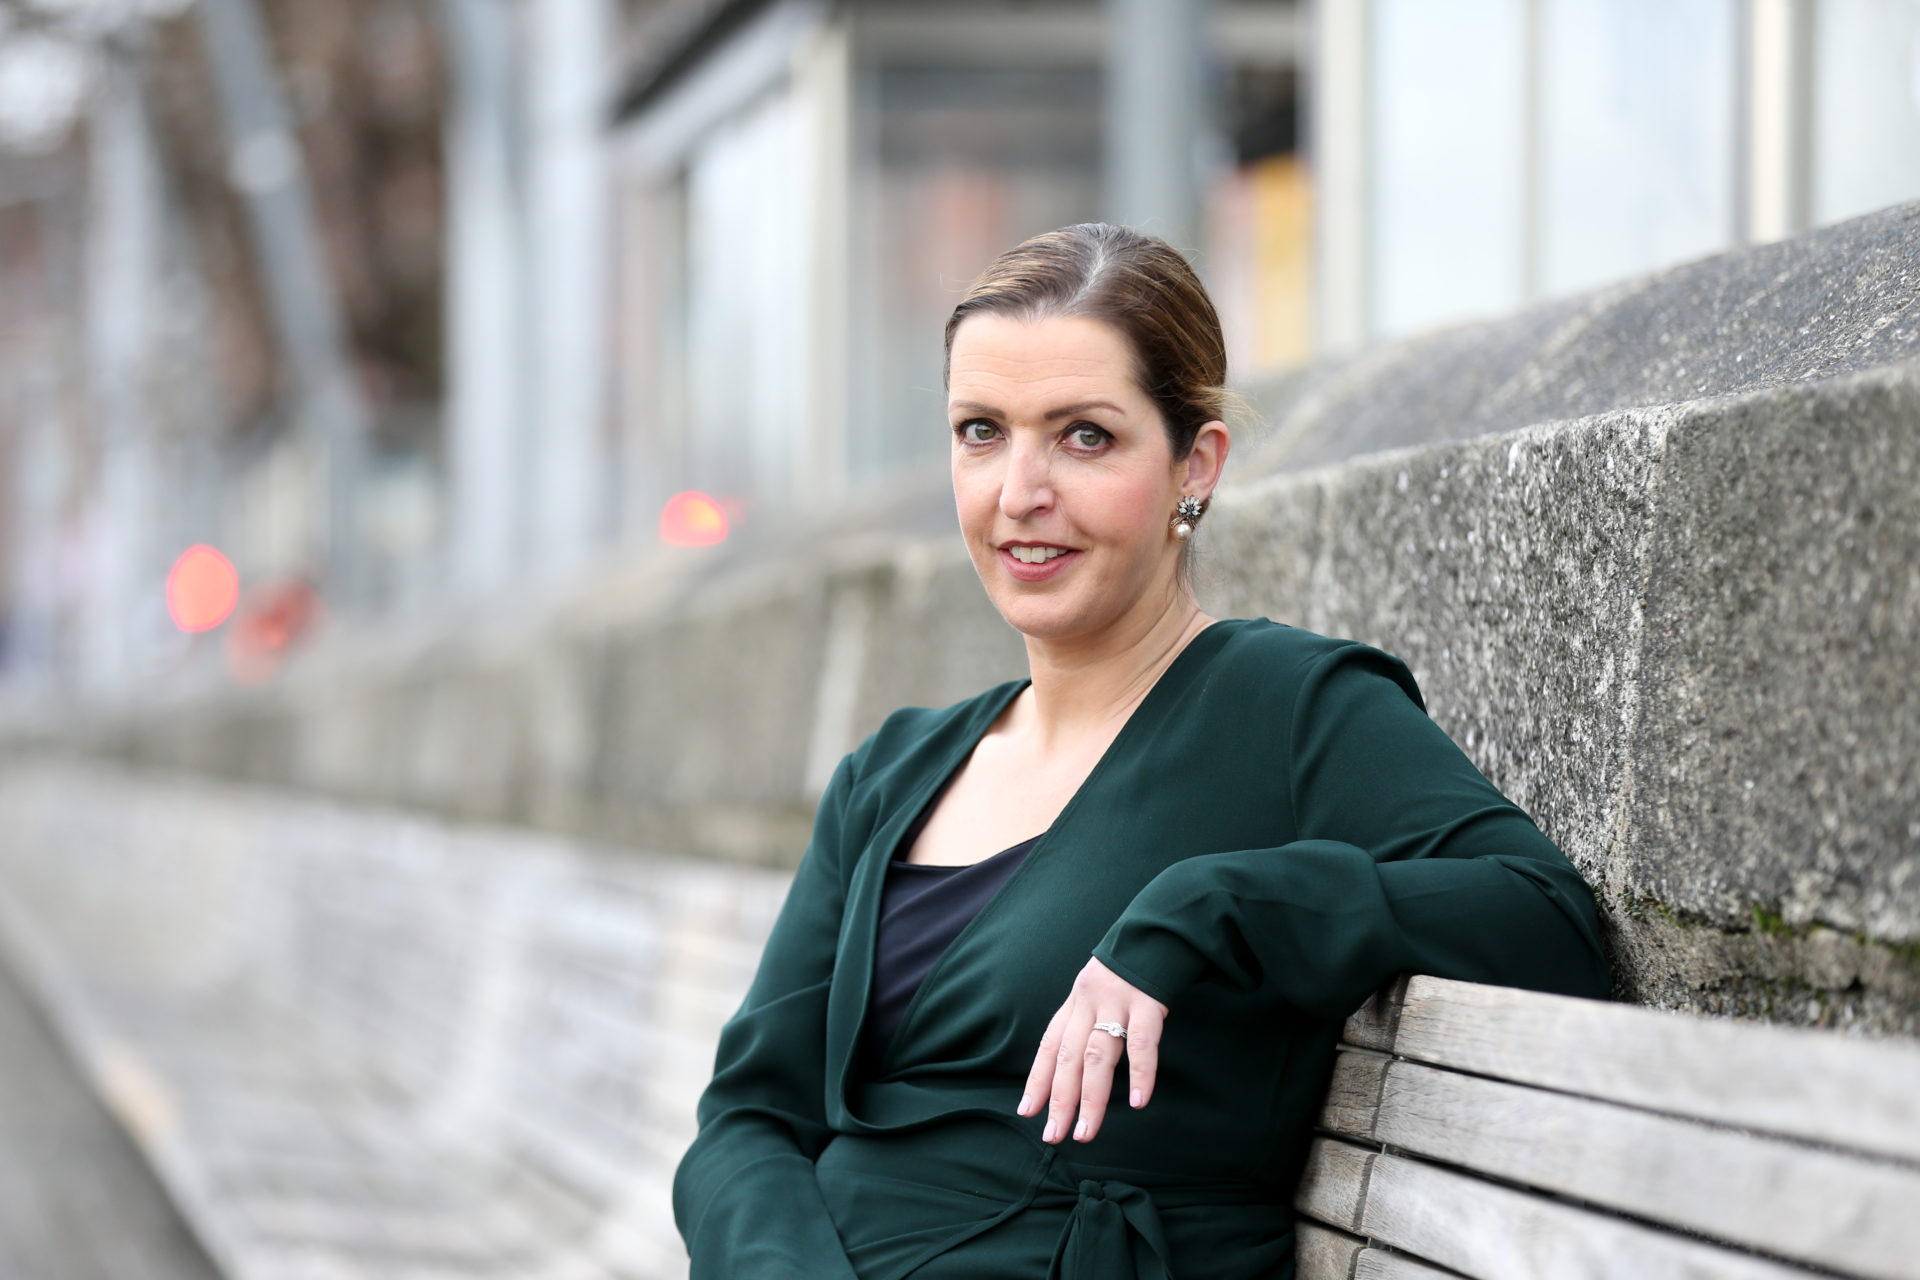 Cervical Cancer campaigner Vicky Phelan sitting on a bench on the quays in Dublin. Image: Sam Boal/RollingNews